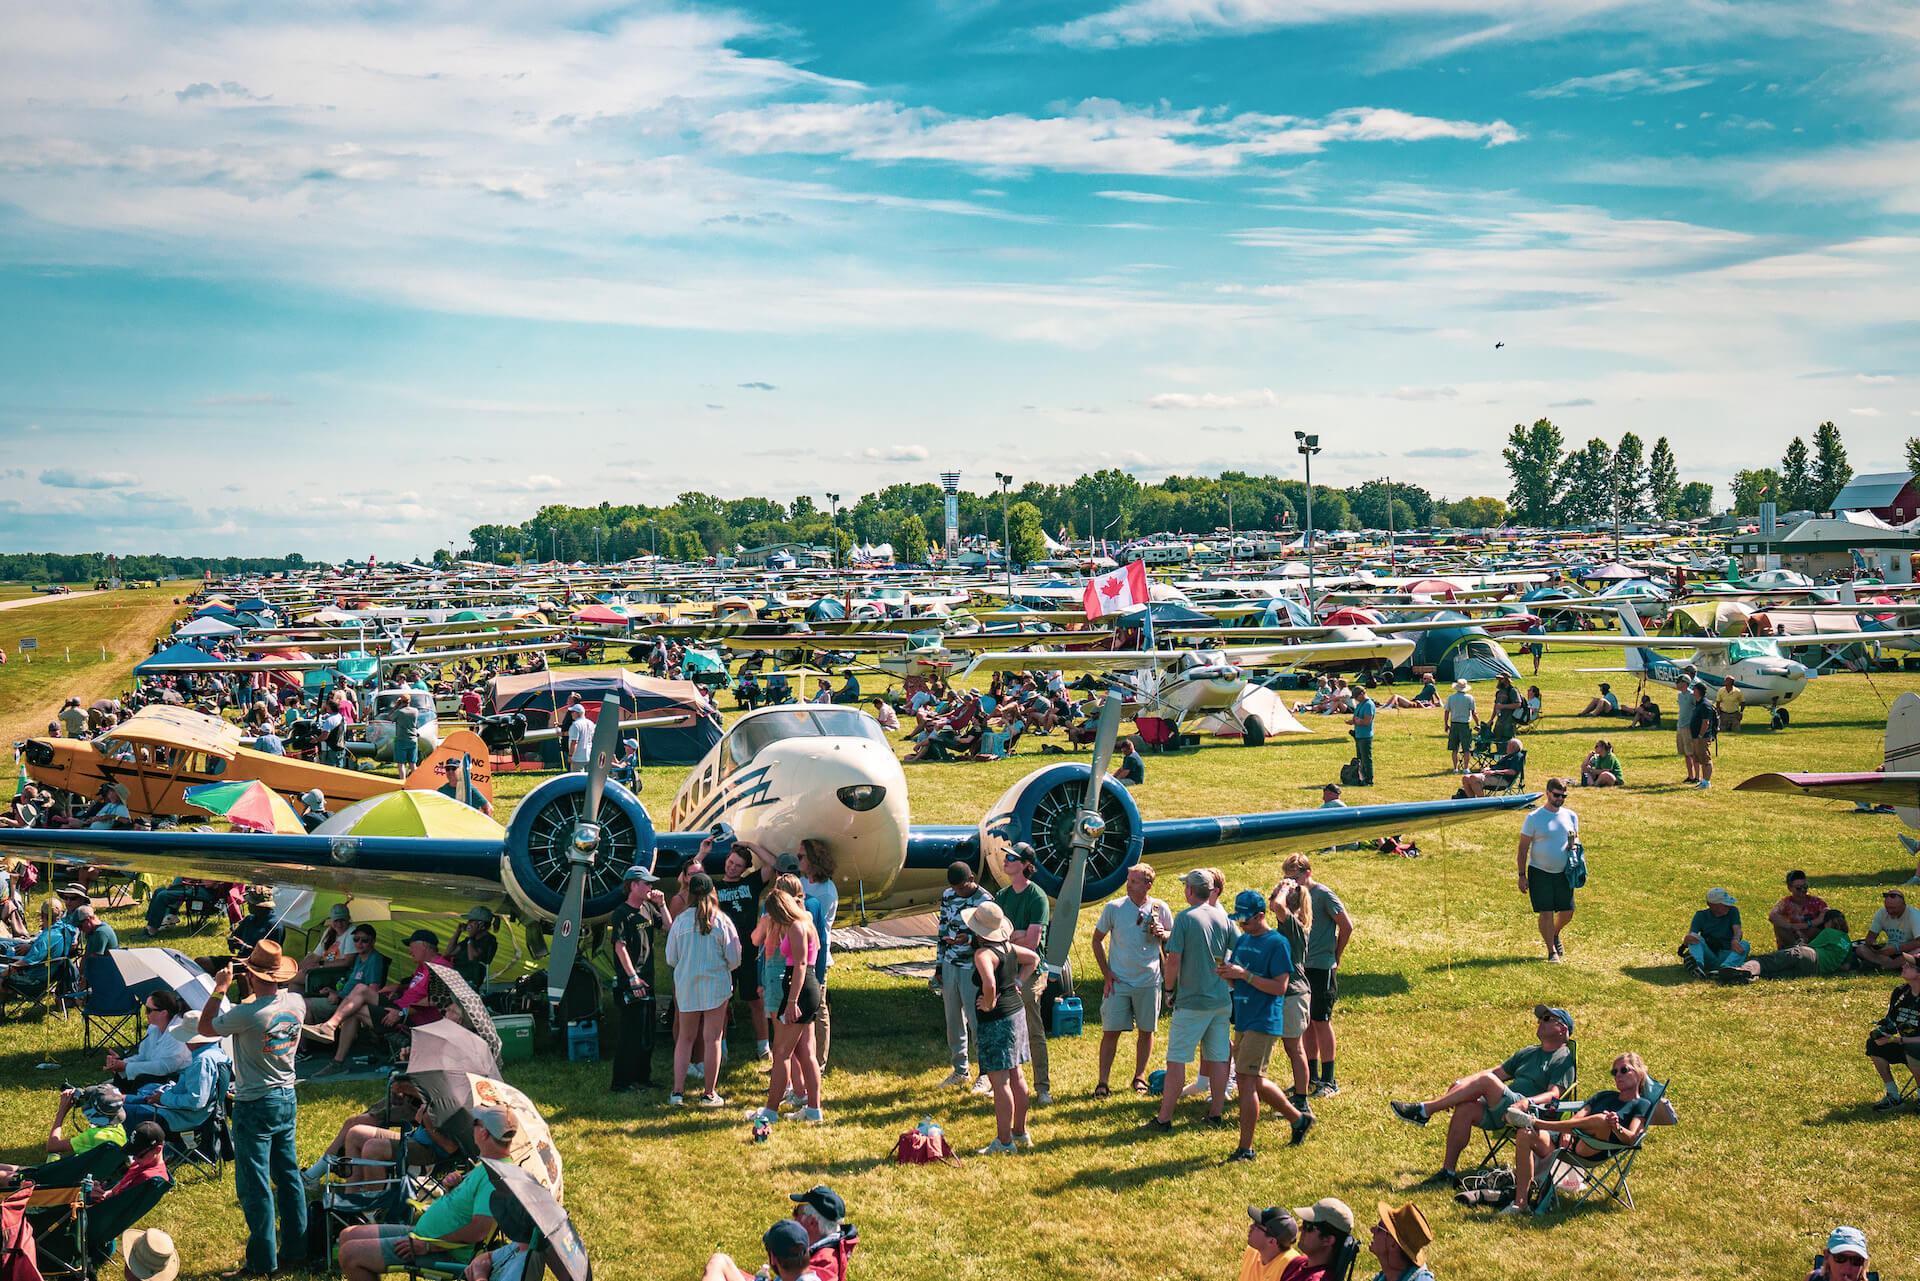 A field of planes and people at Oshkosh Airventure